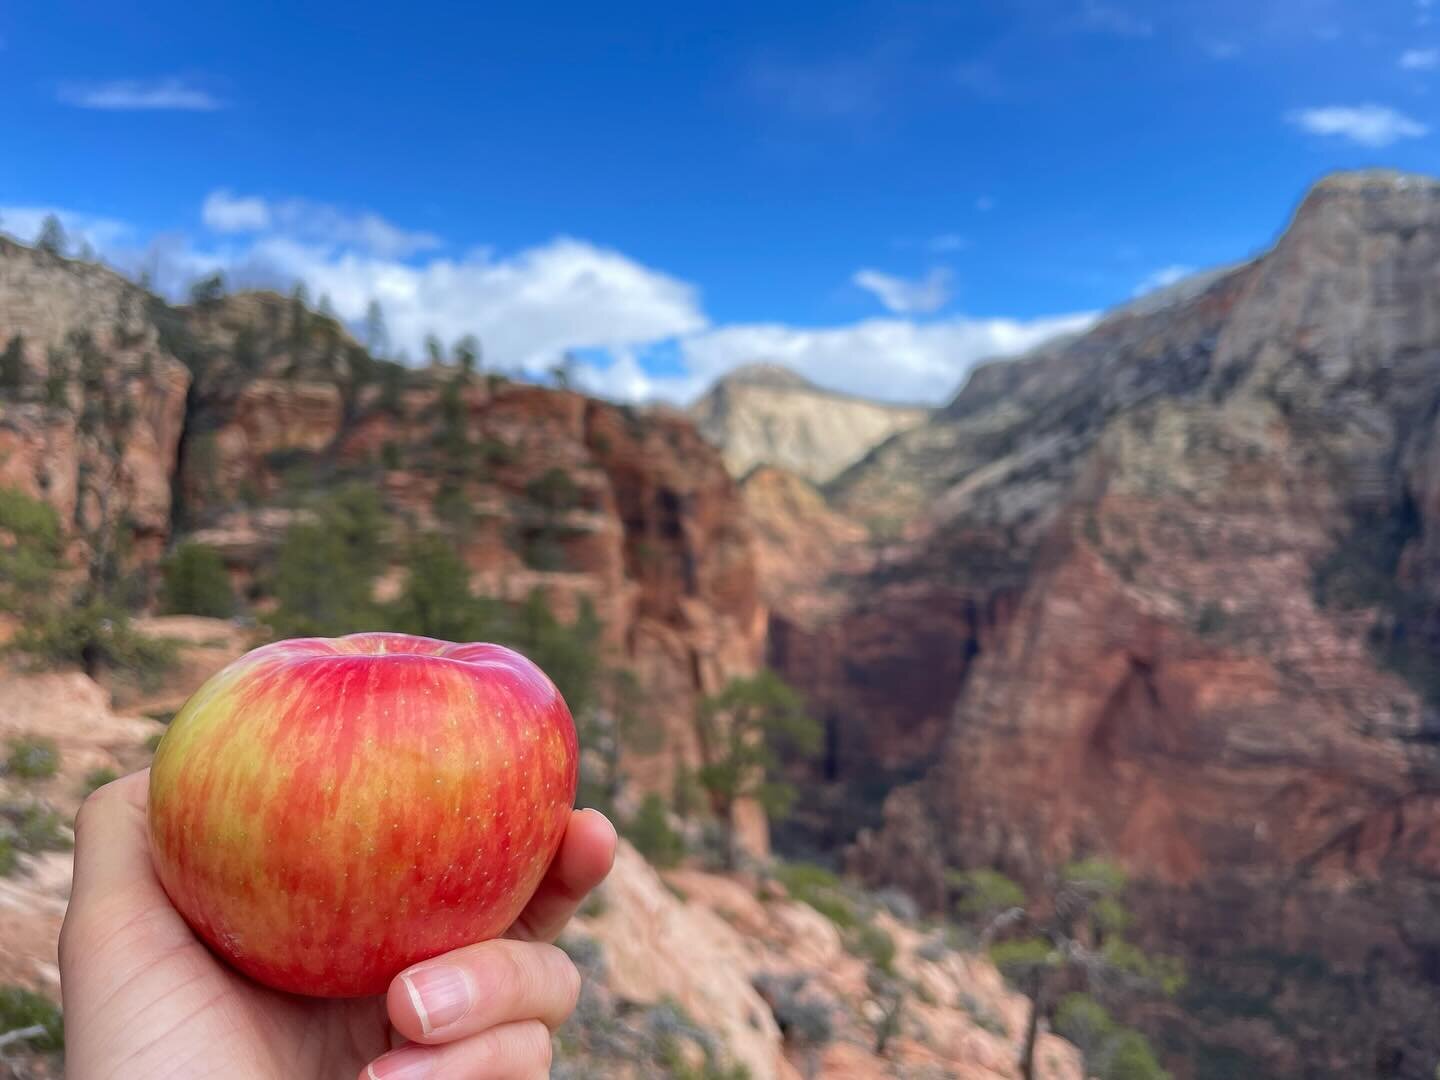 Spring break is right around the corner! 

Be sure to bring some healthy &amp; local PNW snacks on your next adventure 🍎

(Don&rsquo;t forget to follow Leave No Trace principles if you venture into our wonderful wild spaces - that includes apple cor